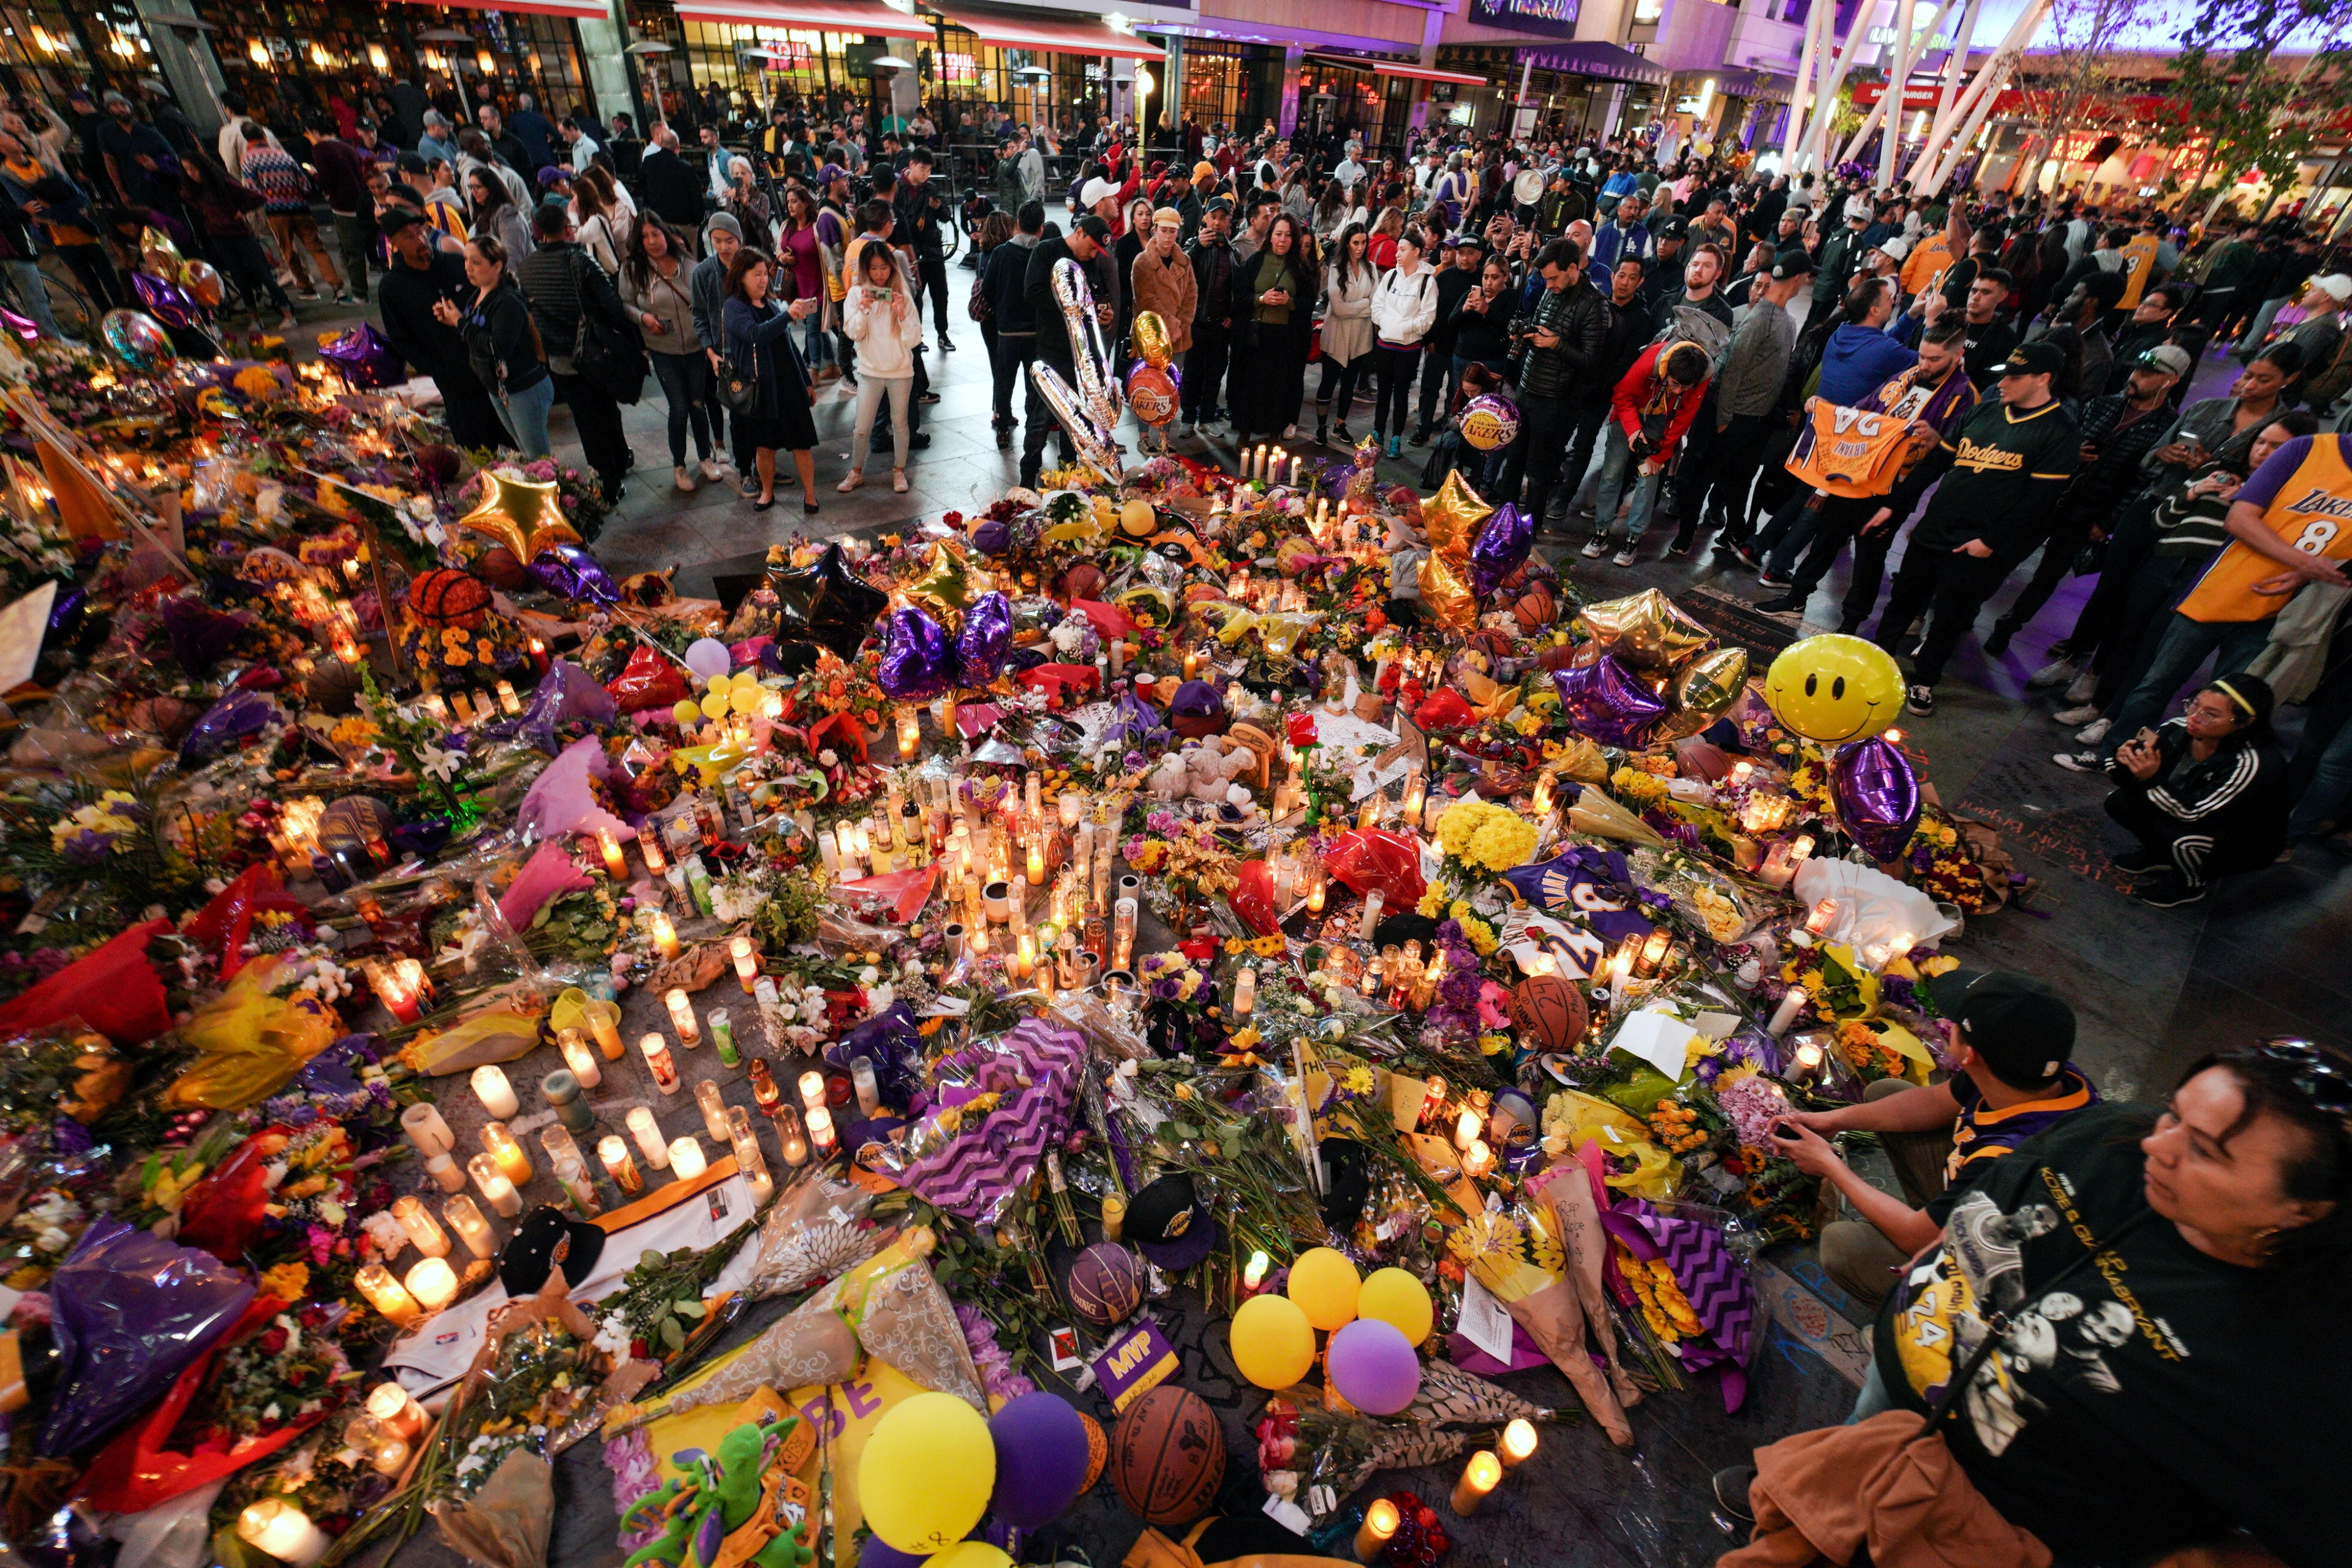 Reuters - Mourners gather near Staples Center